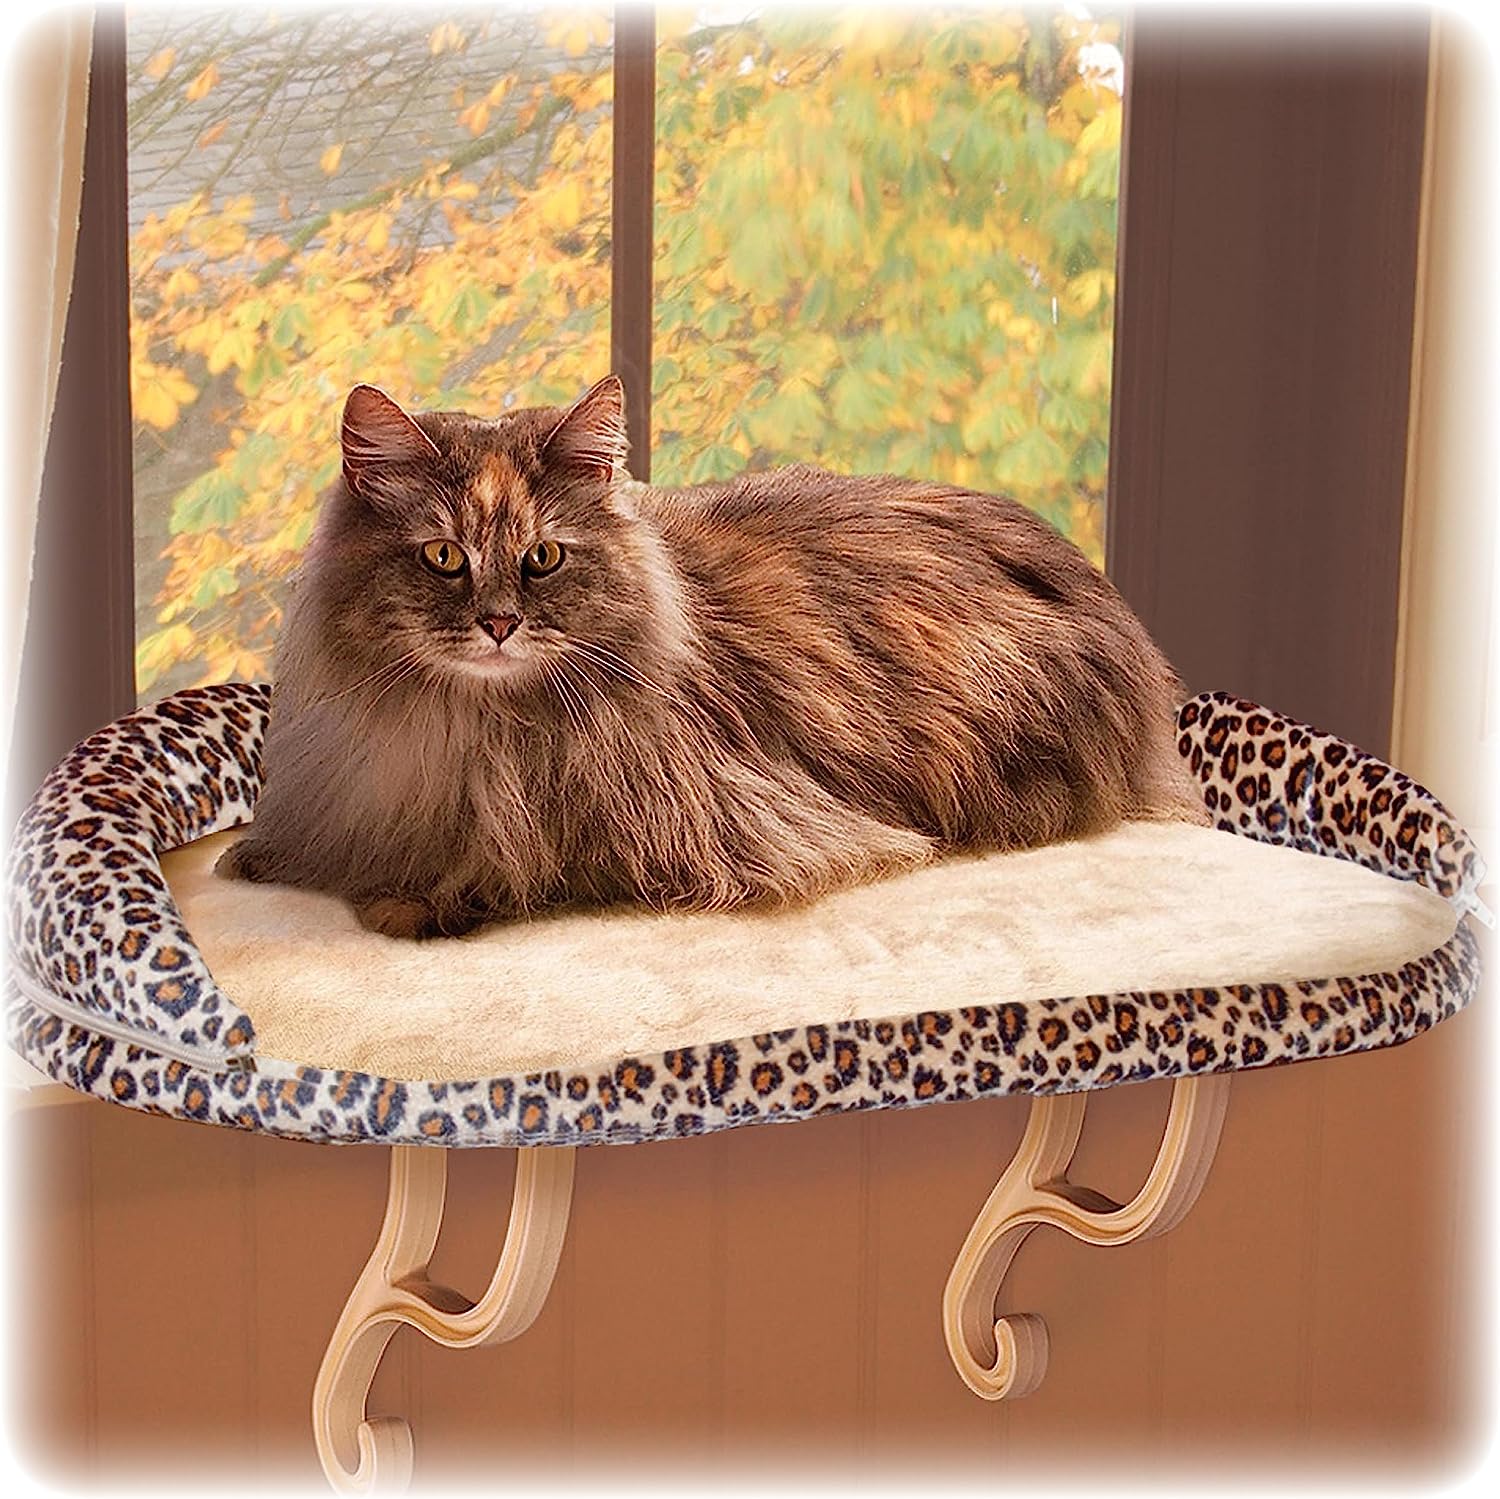 7. K&H Pet Products Deluxe Kitty Window Sill Bed